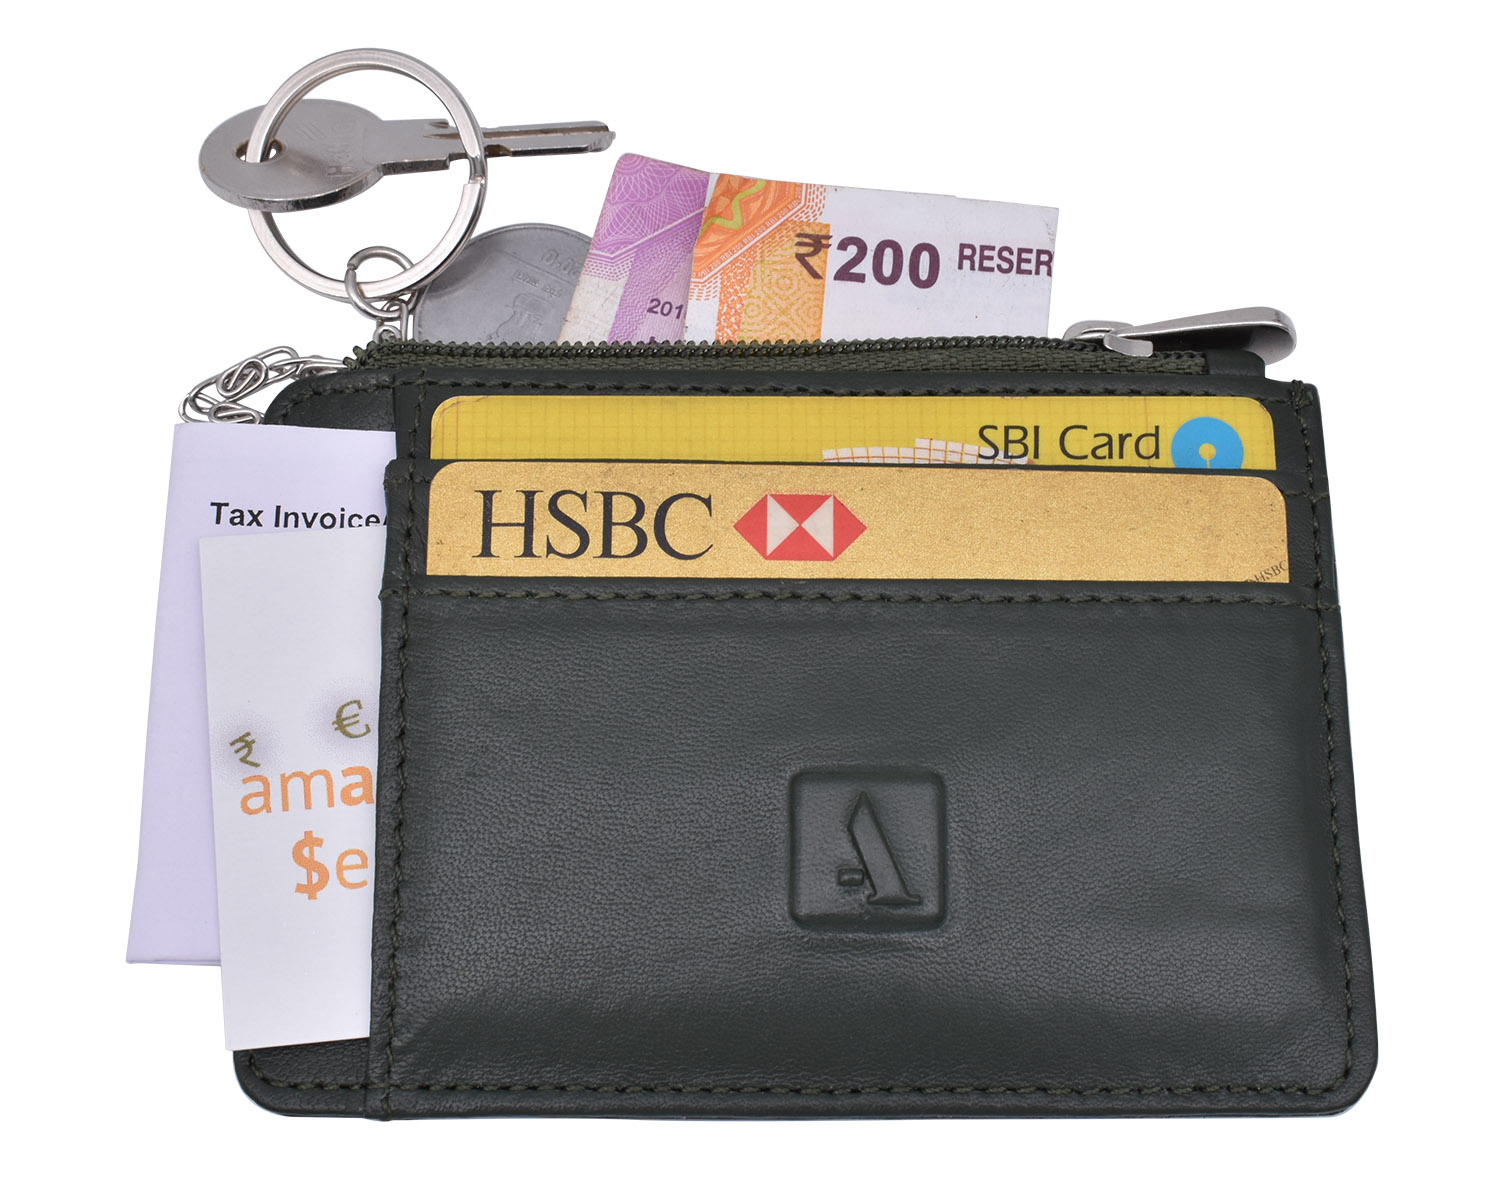 W201--Credit Card Holder With Photo Id In Genuine Leather - Green